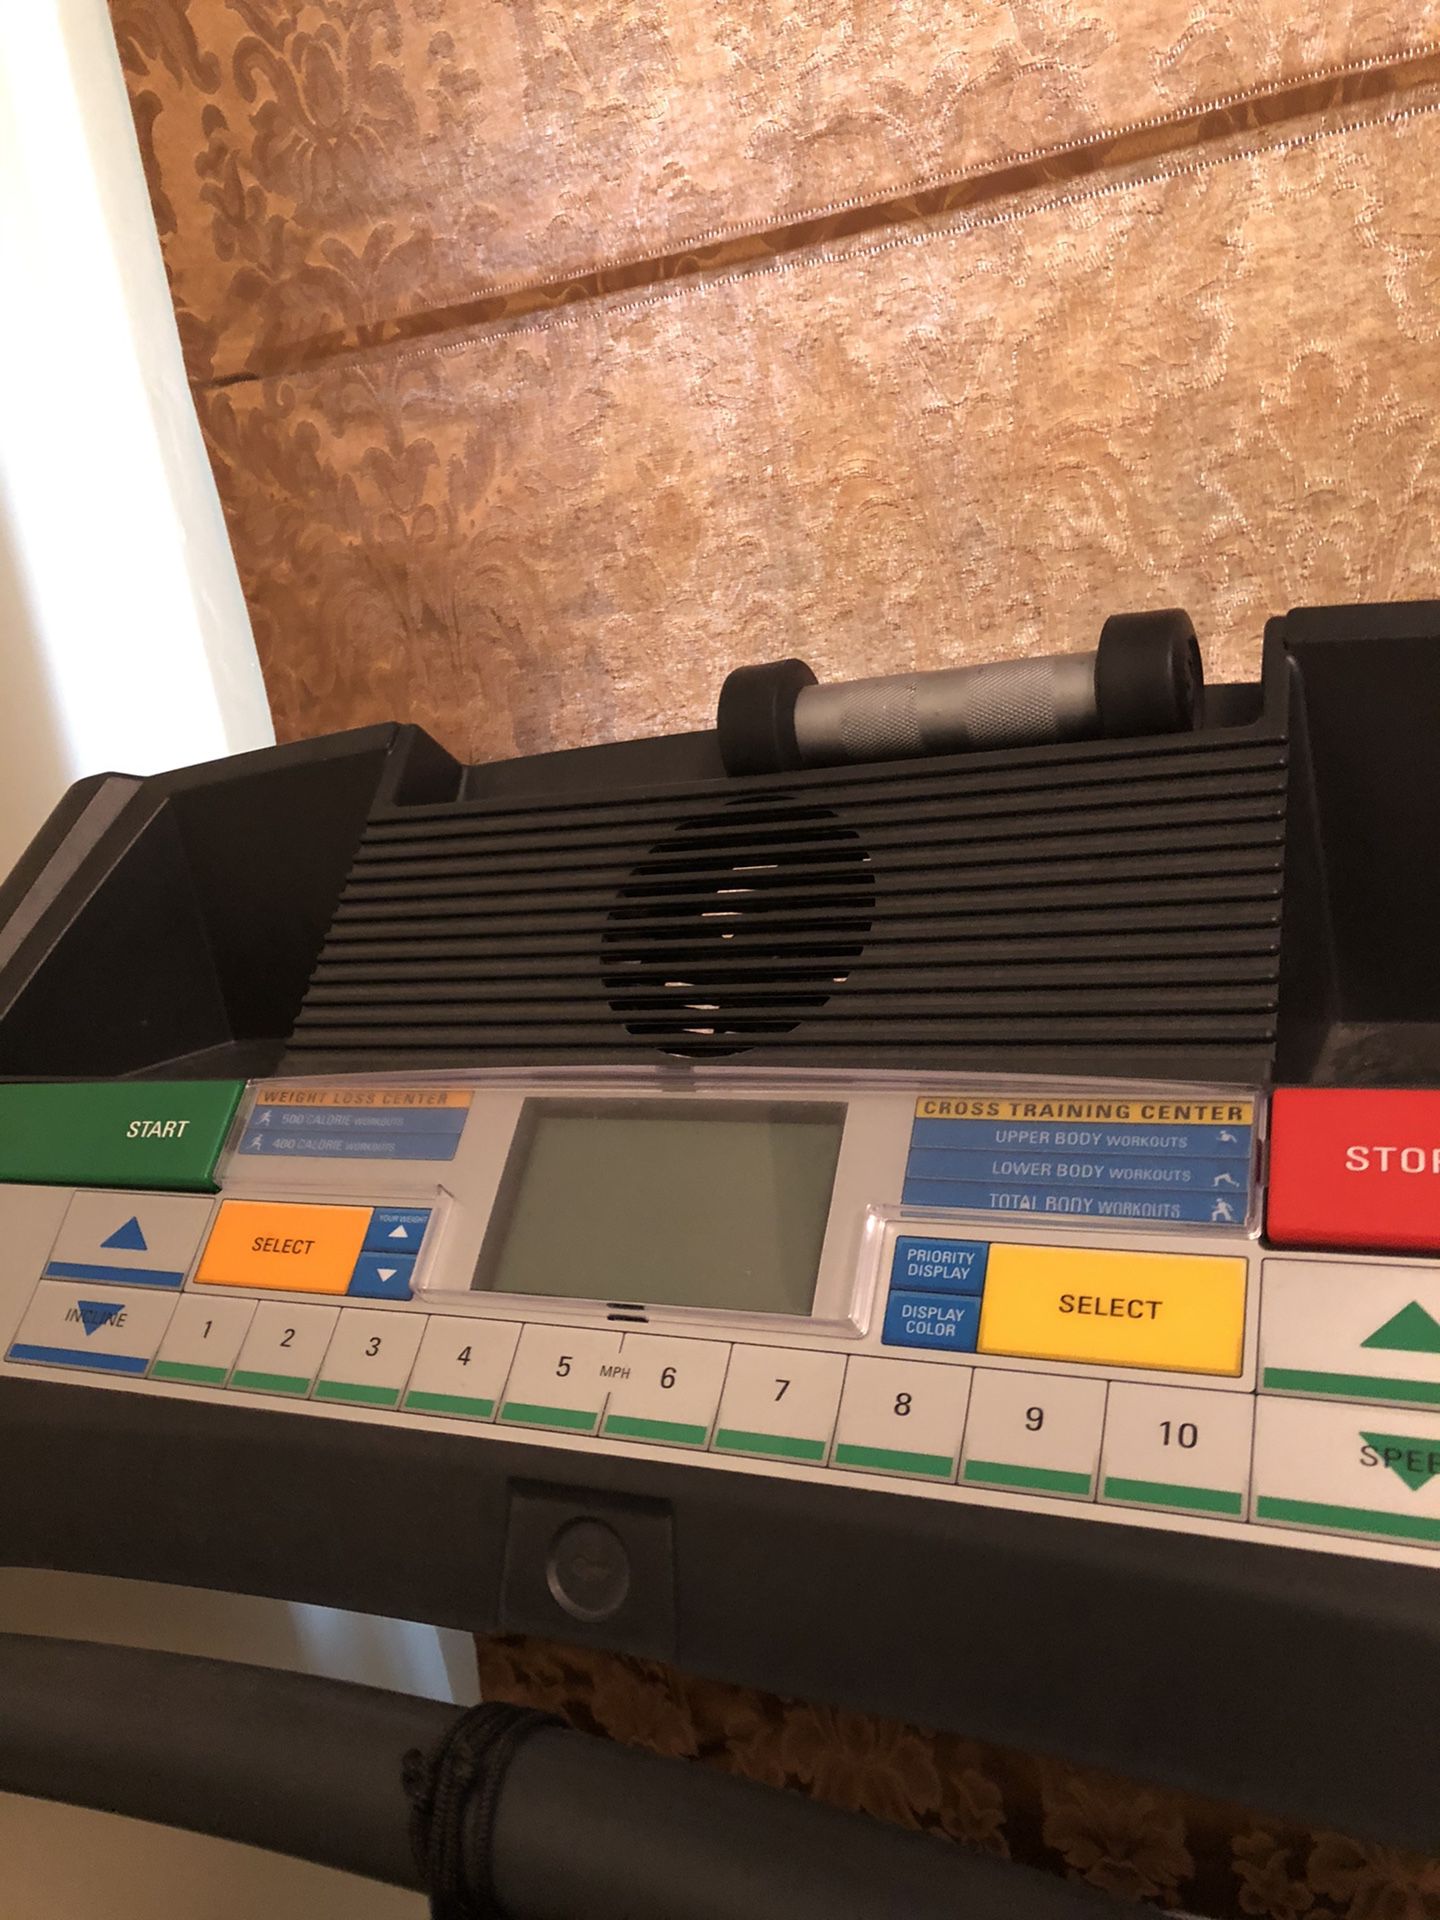 Great deal treadmill in great condition $100